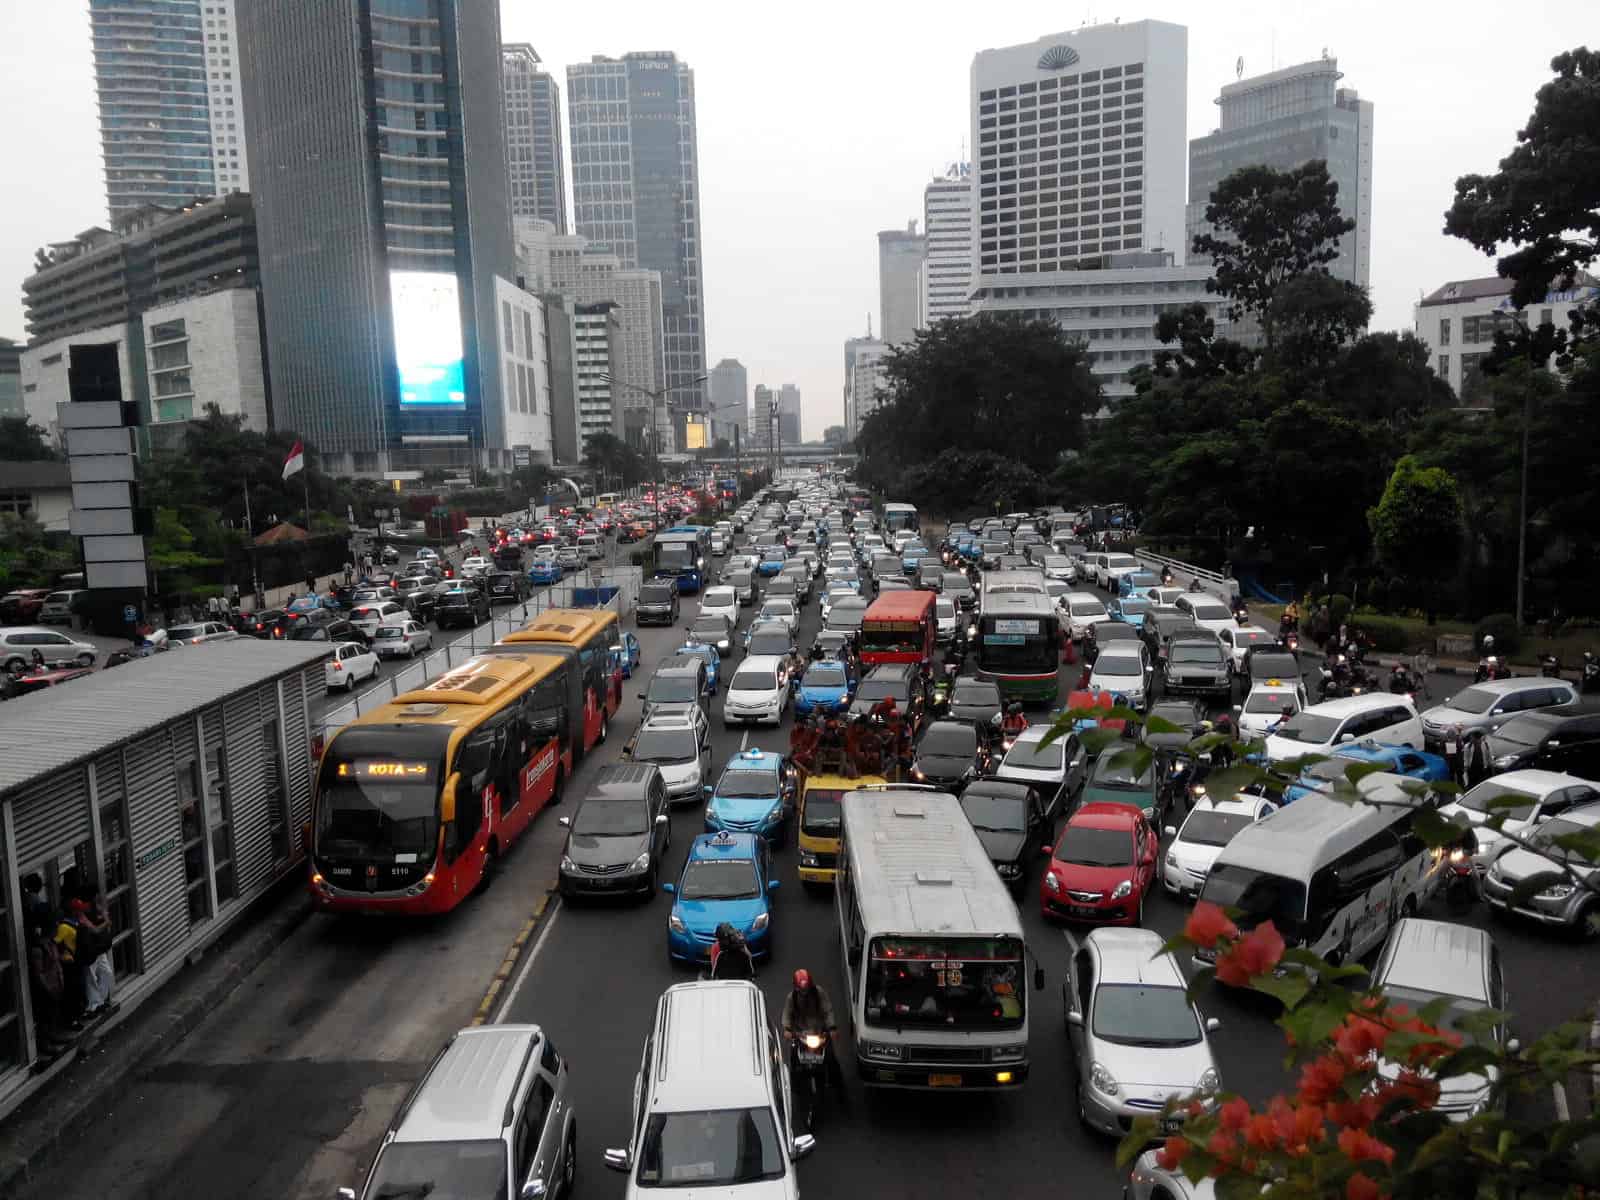 Figure 4: Bus rapid transit lanes intended to improve traffic 
conditions in Indonesia city (credit: GIZ Indonesia)